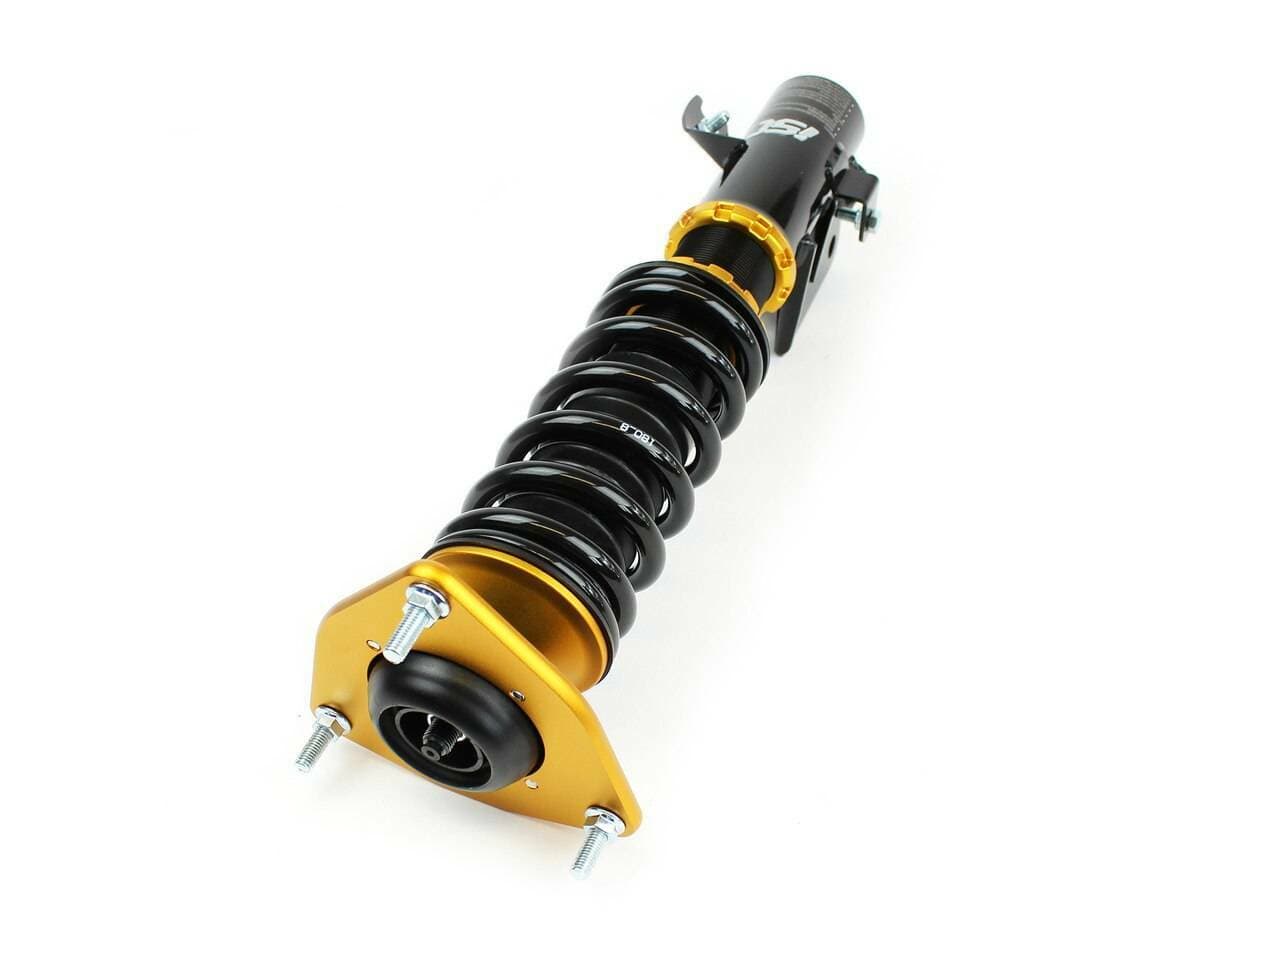 ISC Suspension Basic V2 Street Sport Coilovers - 2003-2007 Subaru Forester ISC-S010B-S